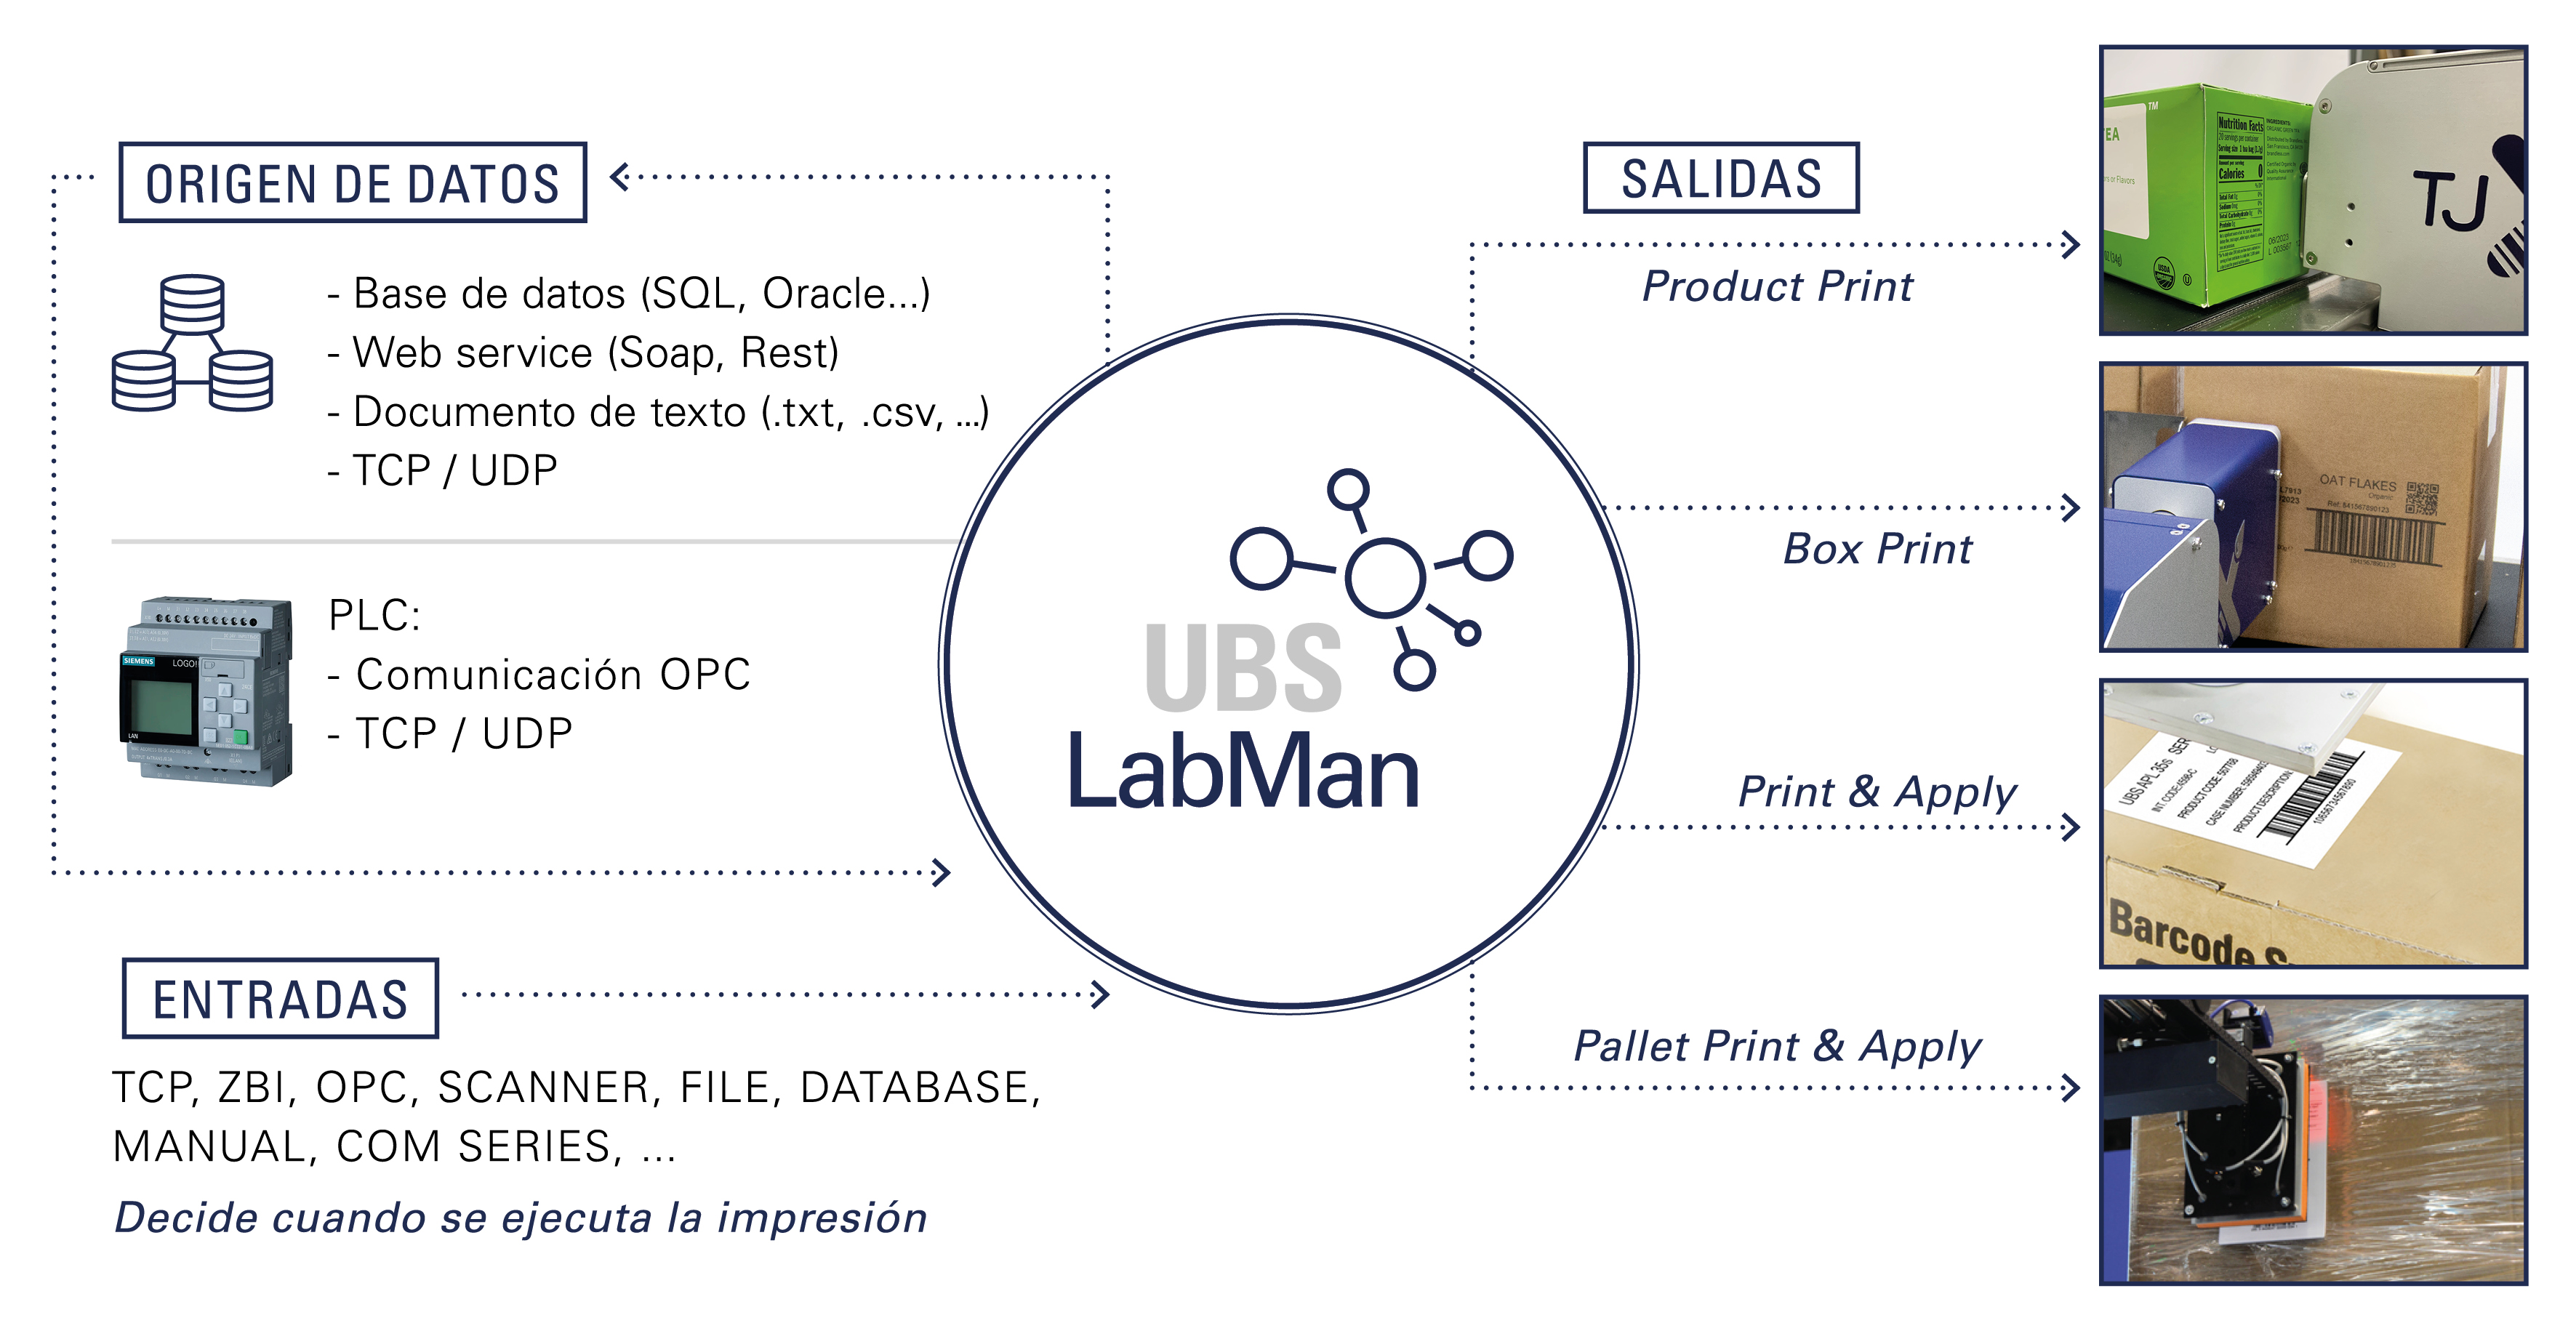 labman-controls-equipment-printing-messages